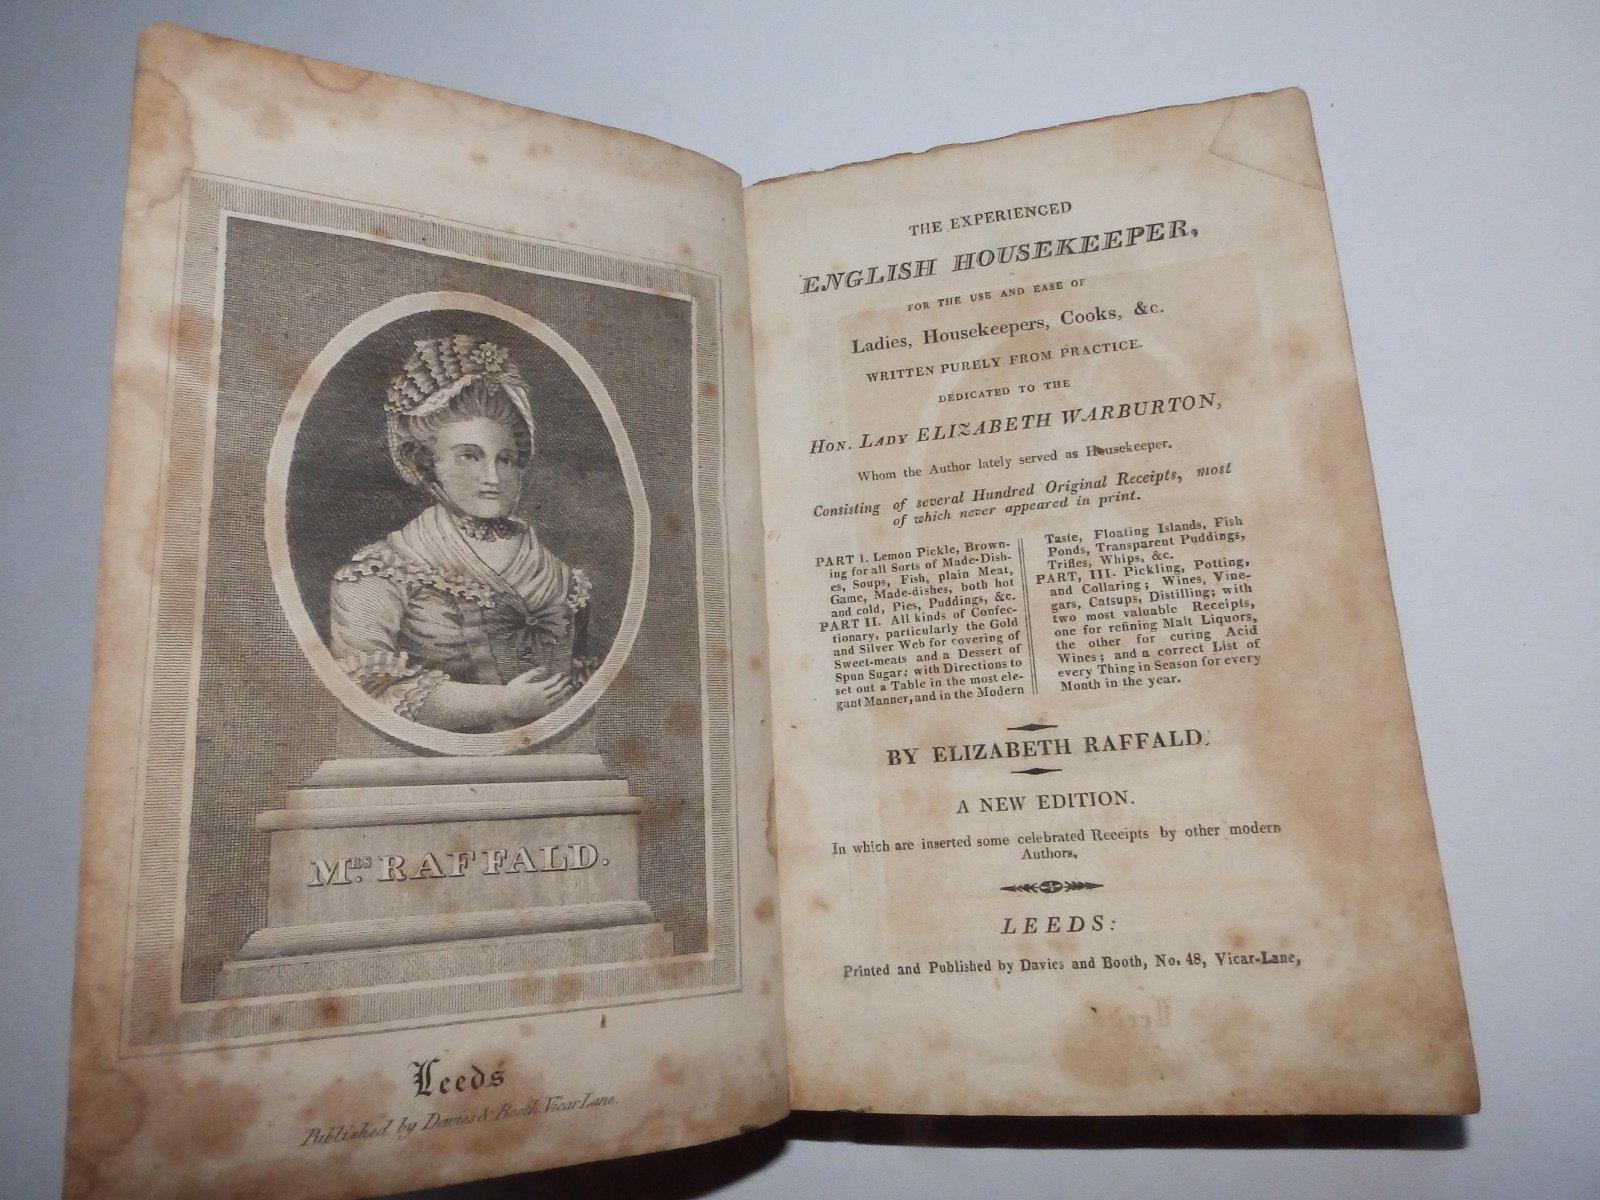 Elizabeth Raffeld - 'The Experienced English Housekeeper', New Edition published in Leeds, leather